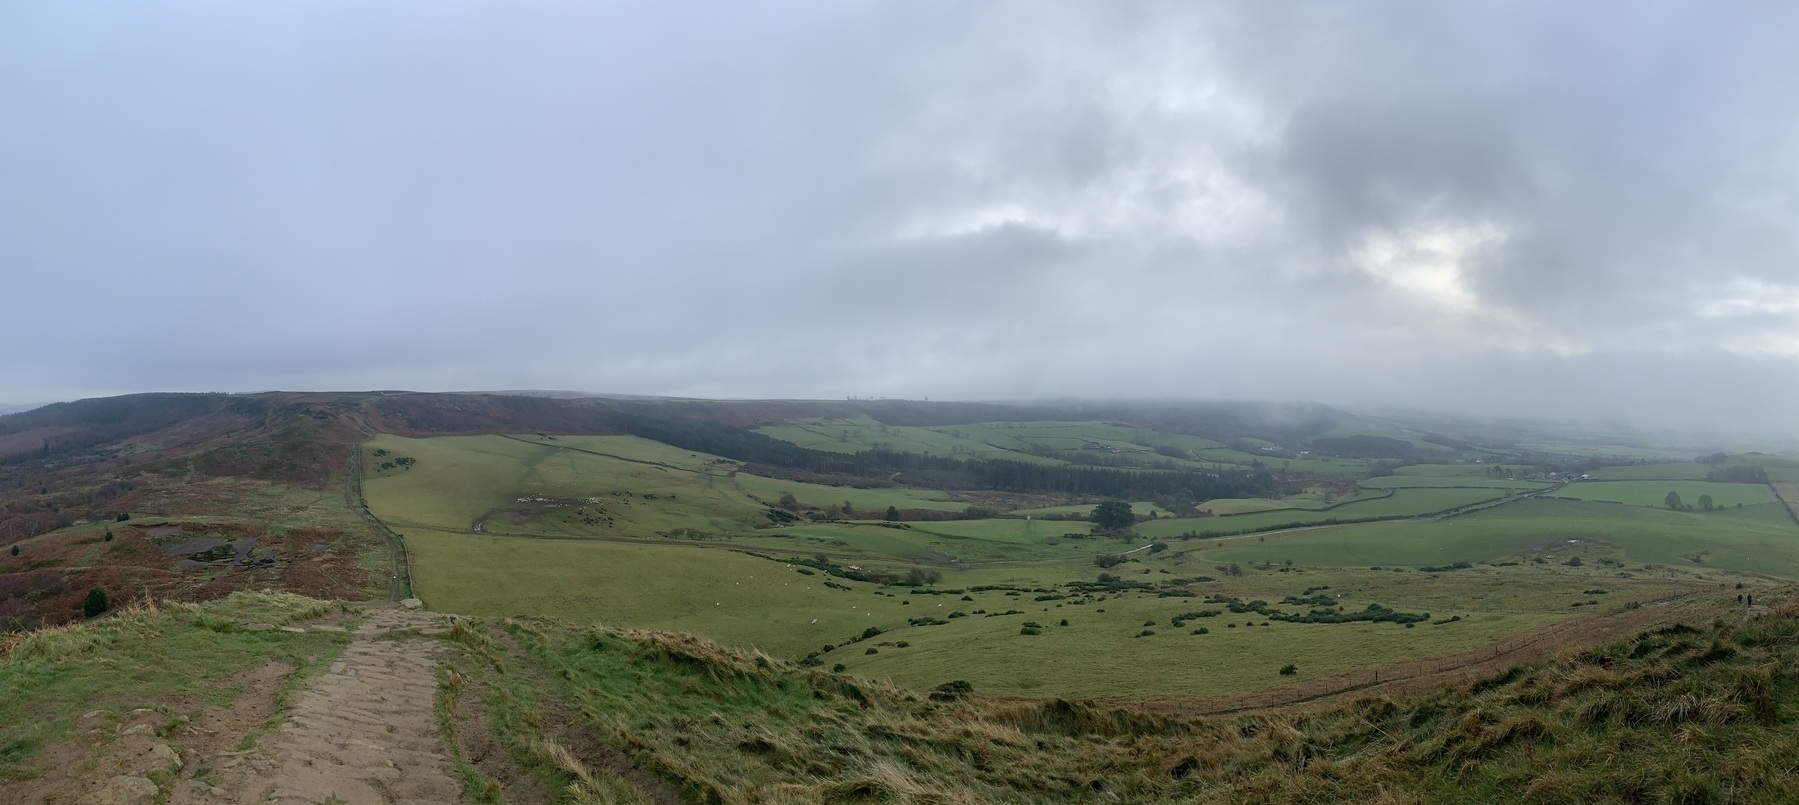 Panoramic view of moor and farmland from part-way up Roseberry Topping on an overcast day.